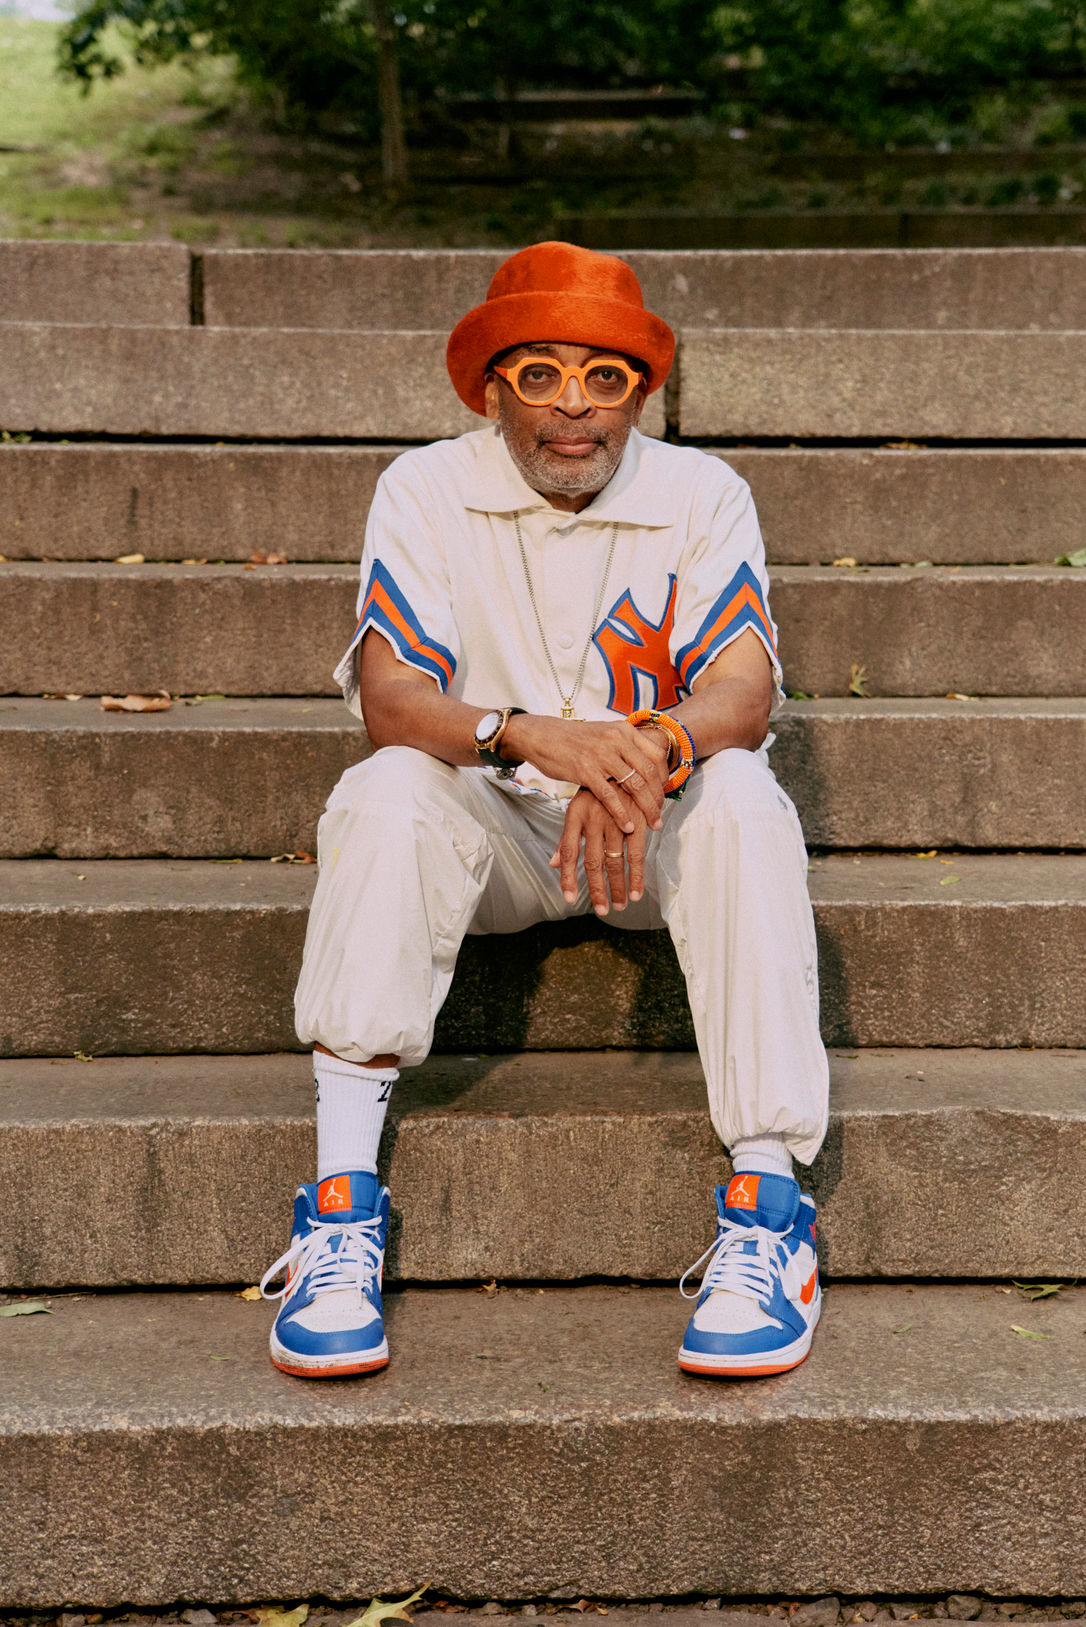 Spike Lee Continues His Unending Fight for a Better Society